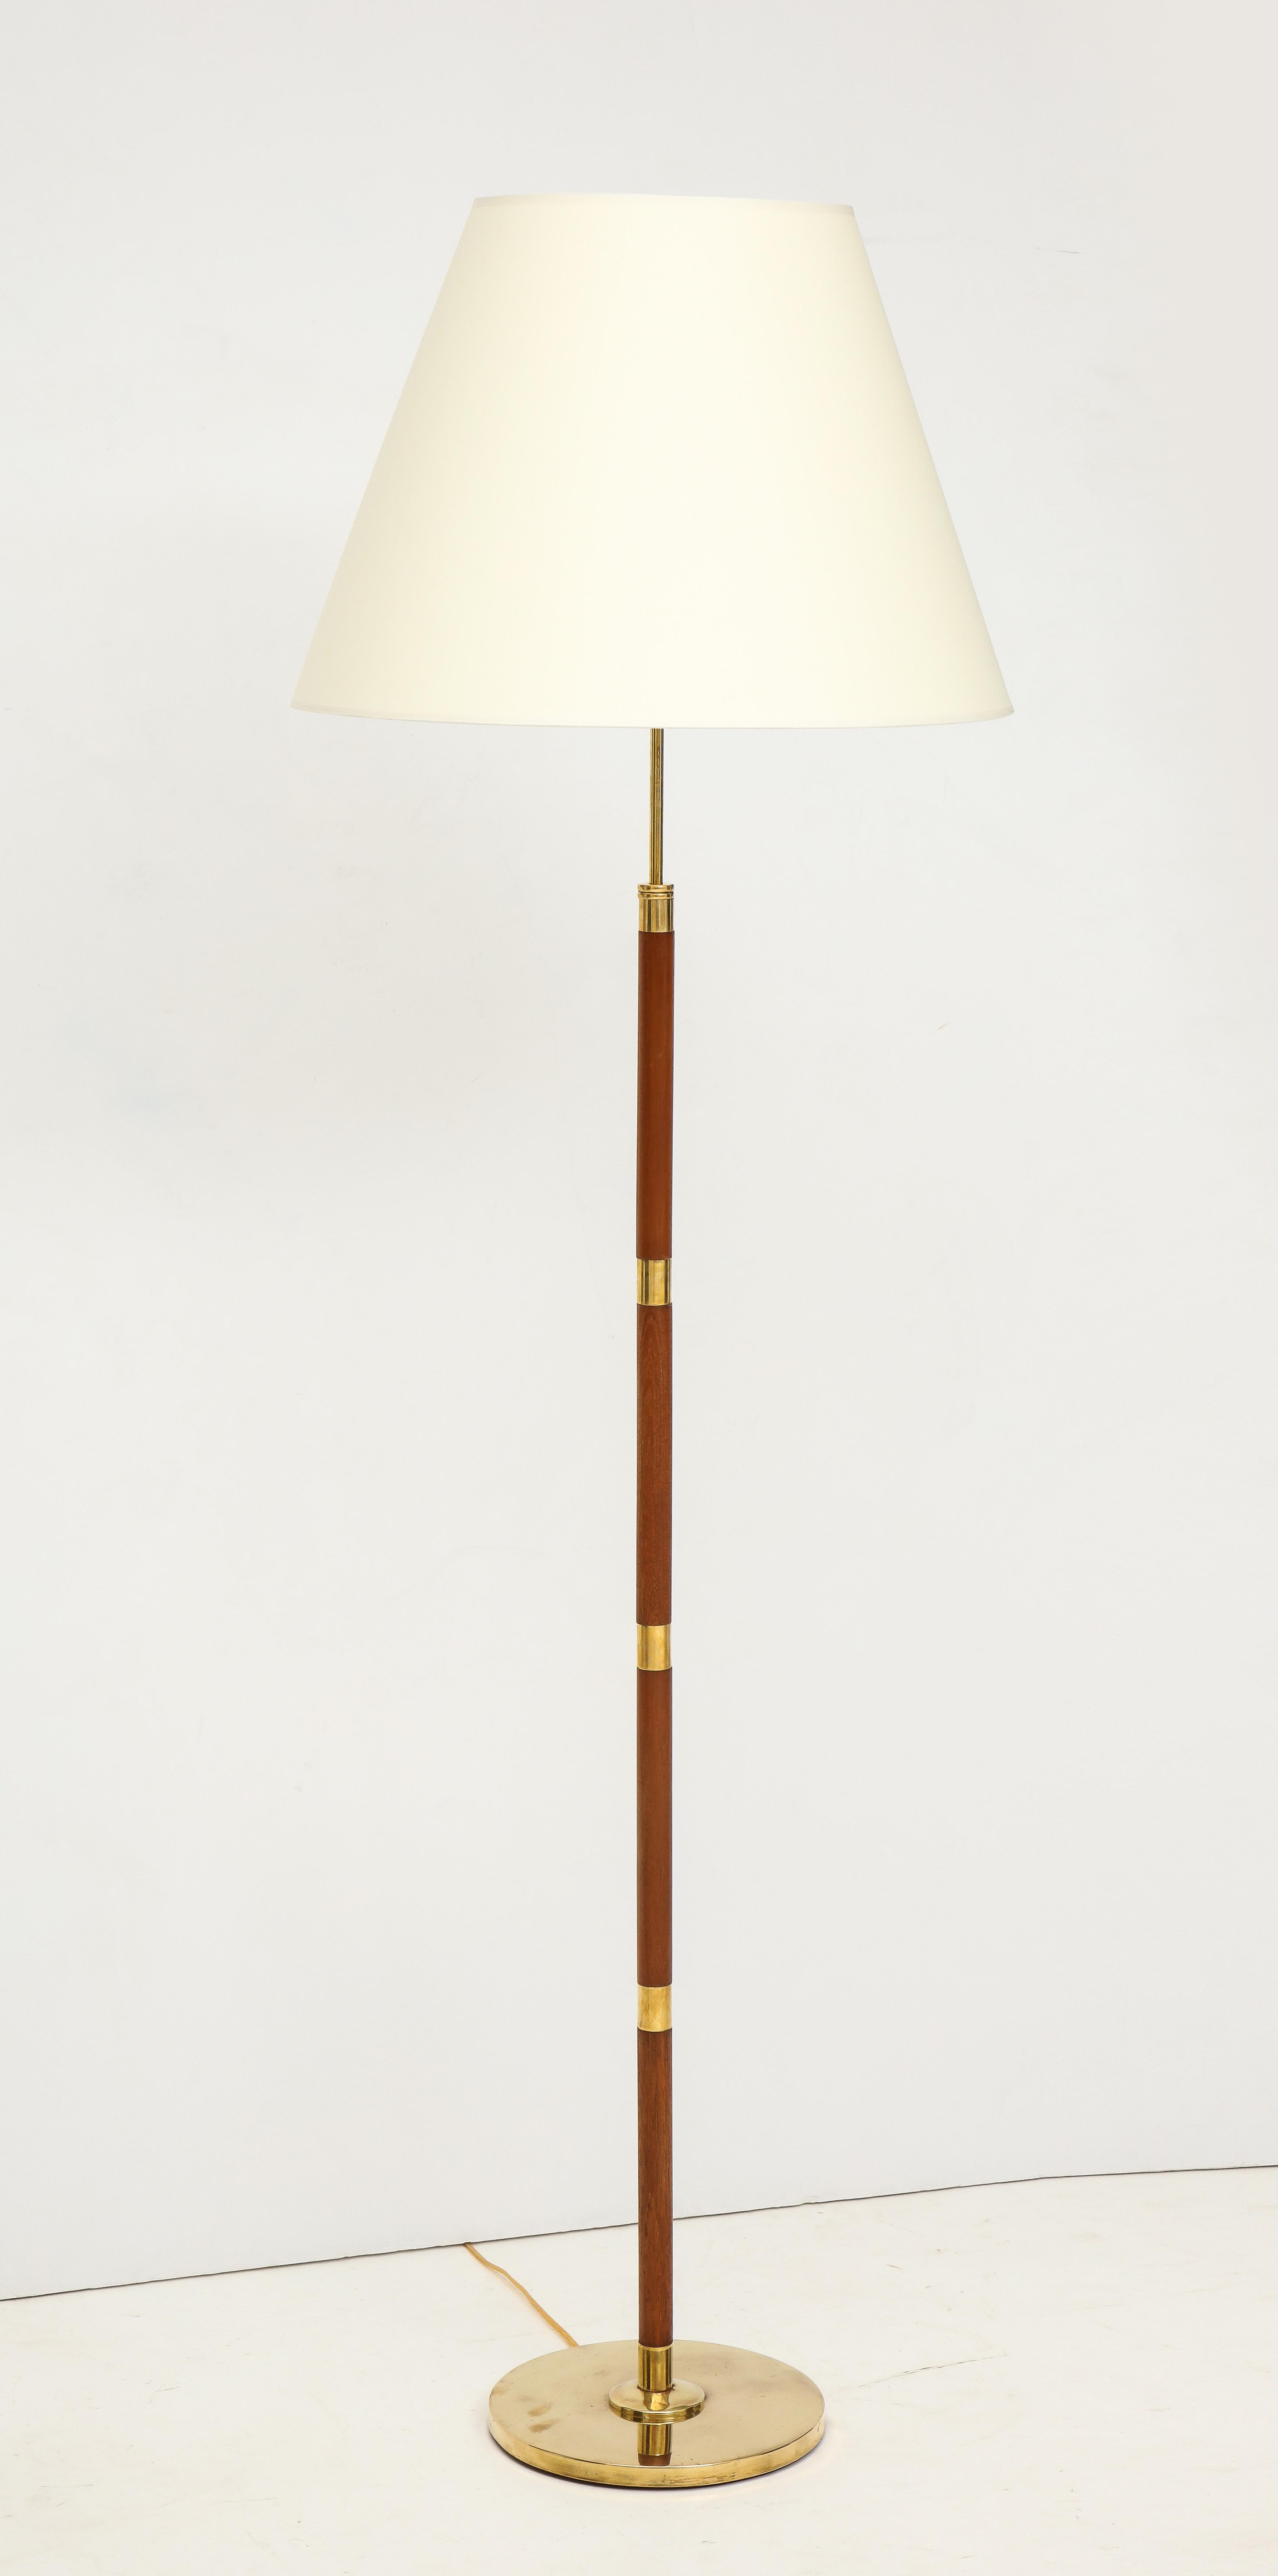 A Danish brass and rosewood floor lamp by Fog & Mørup, circa 1960s. Adjustable height and re-wired for the US. 62in.-69in adjustable height. 19.75in. shade diameter.